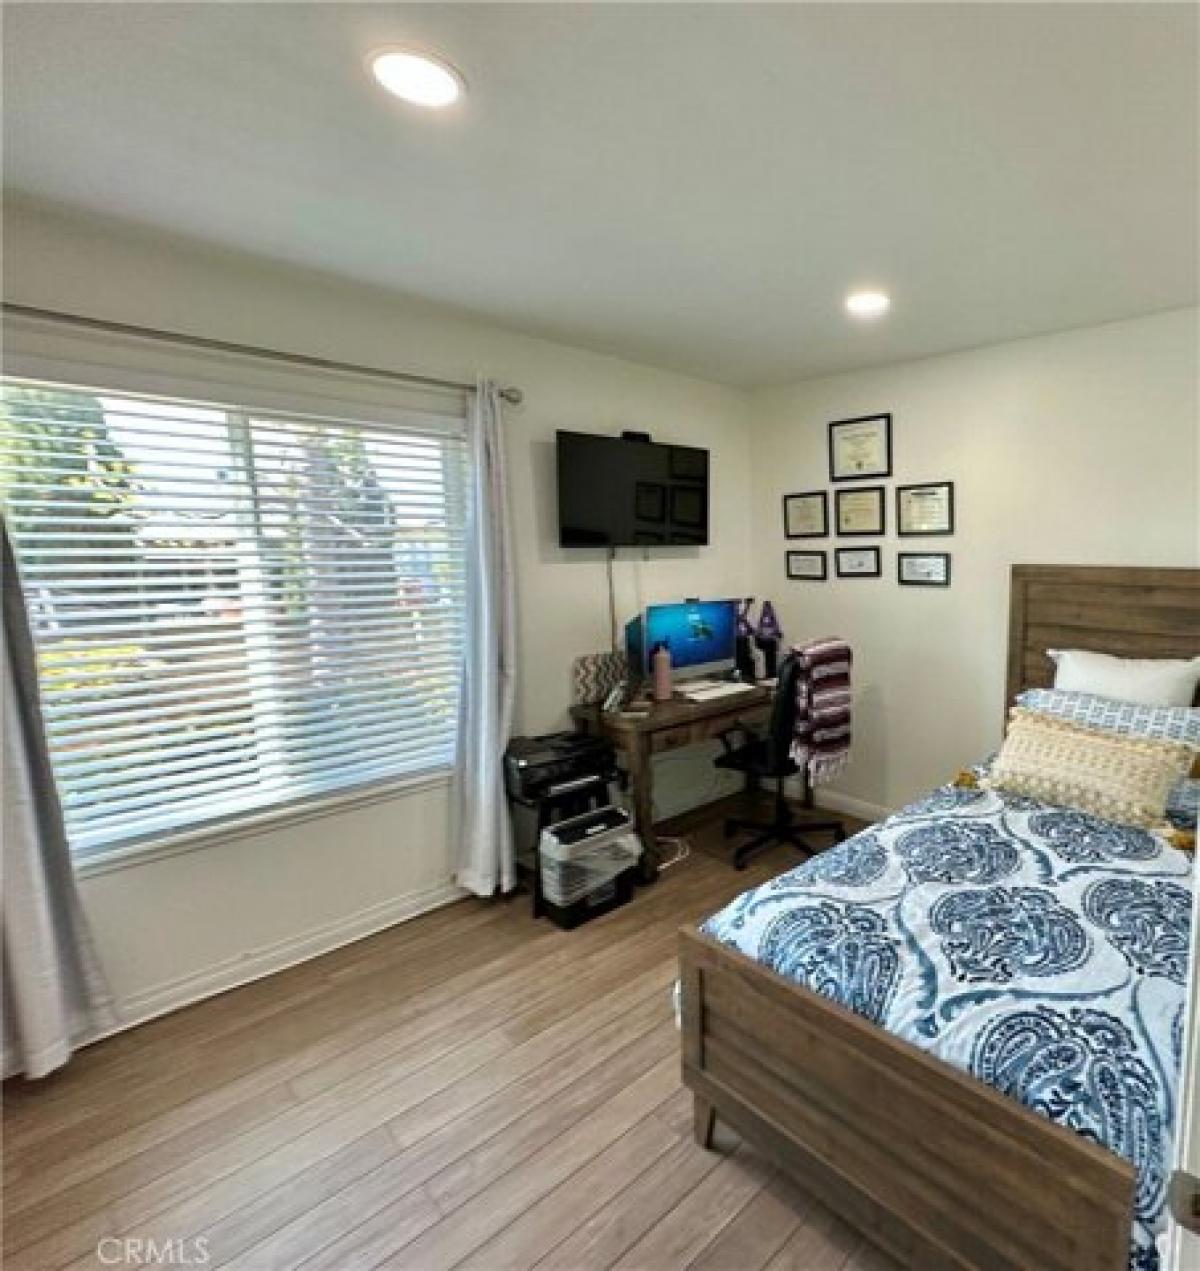 Picture of Home For Rent in San Dimas, California, United States